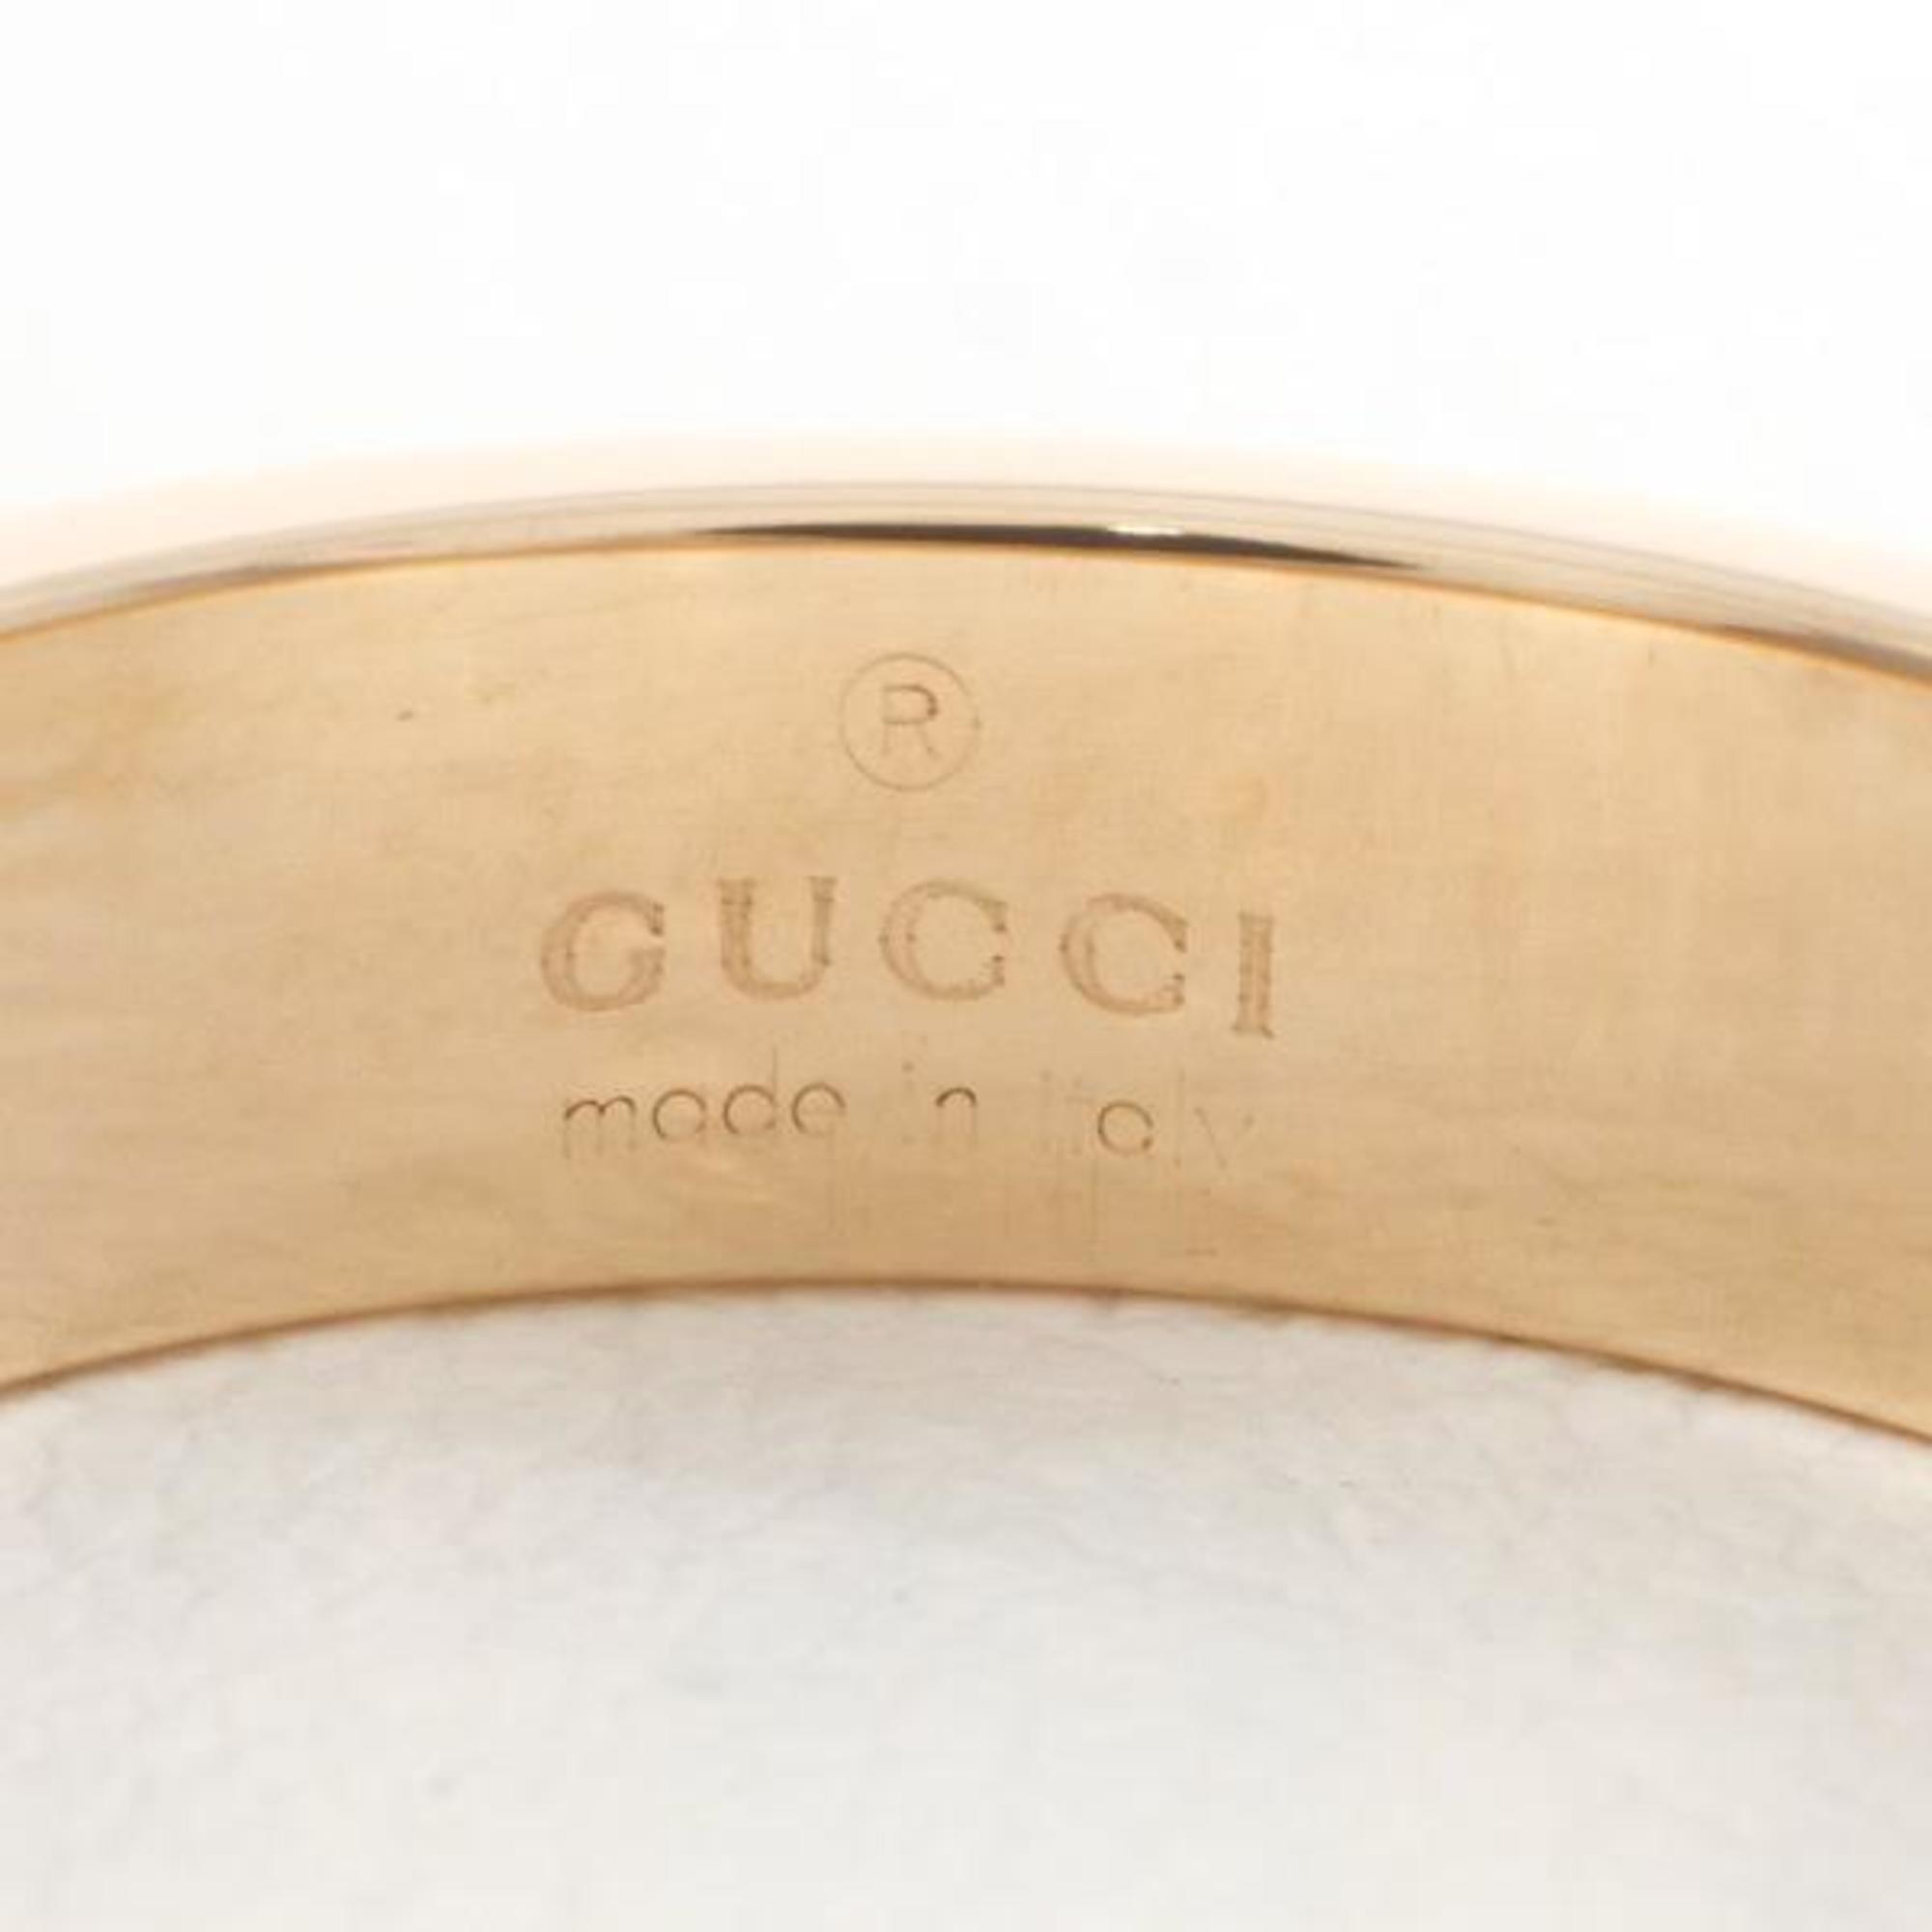 Gucci Icon K18PG Ring Total Weight Approx. 3.4g Jewelry